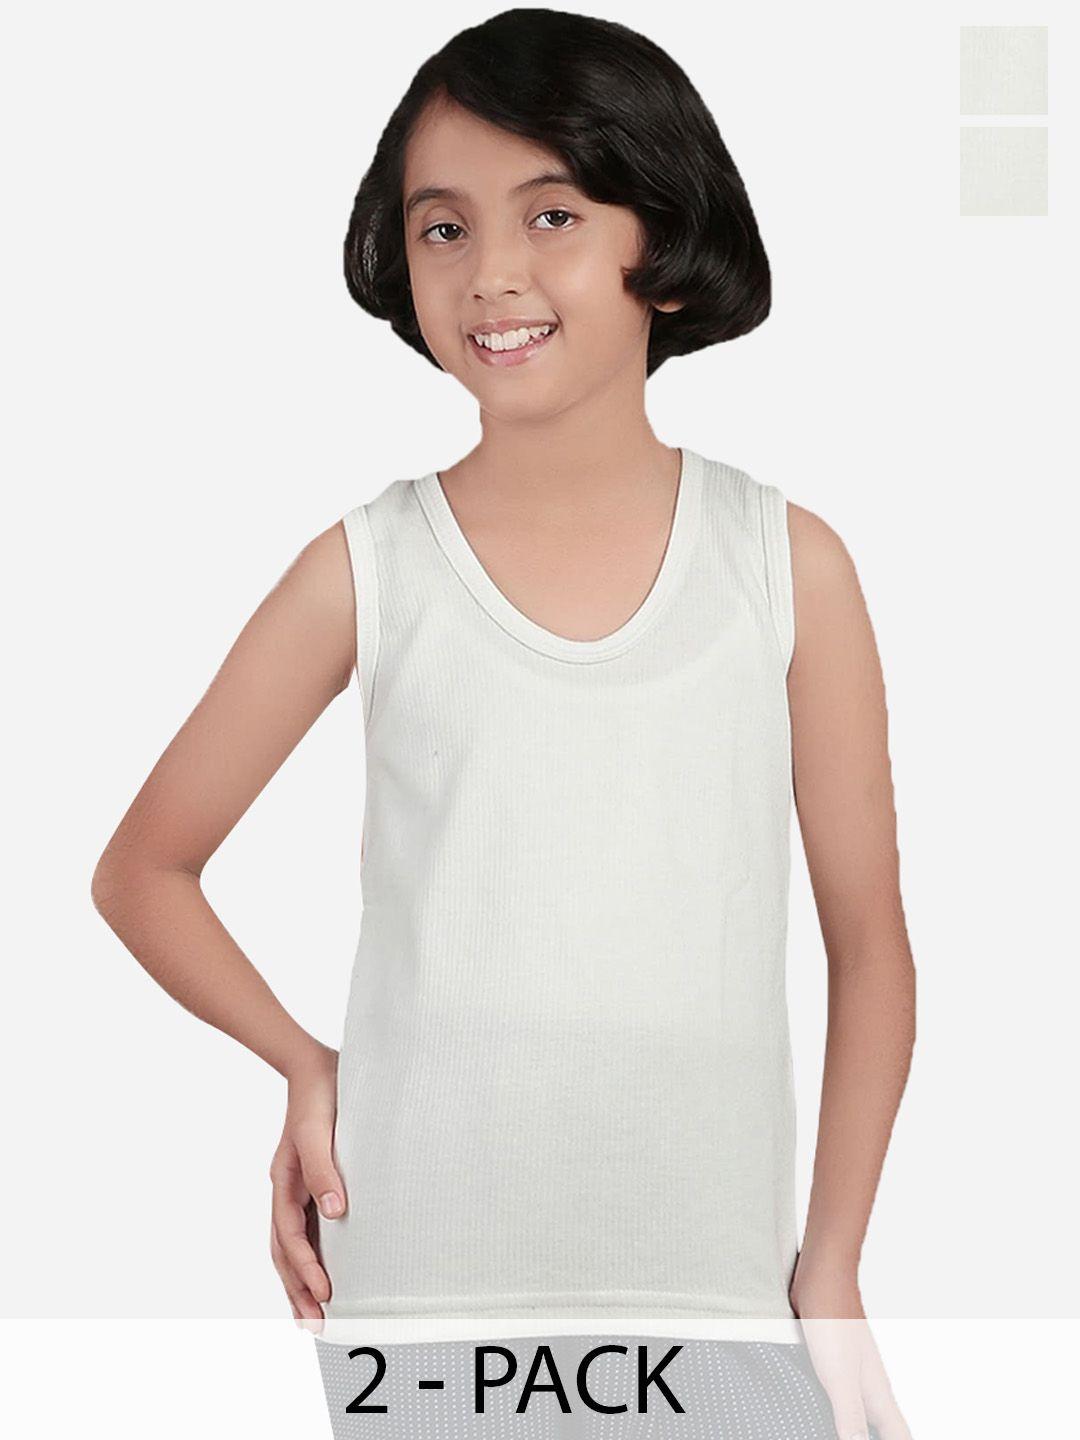 bodycare insider kids pack of 2 round neck sleeveless cotton thermal tops